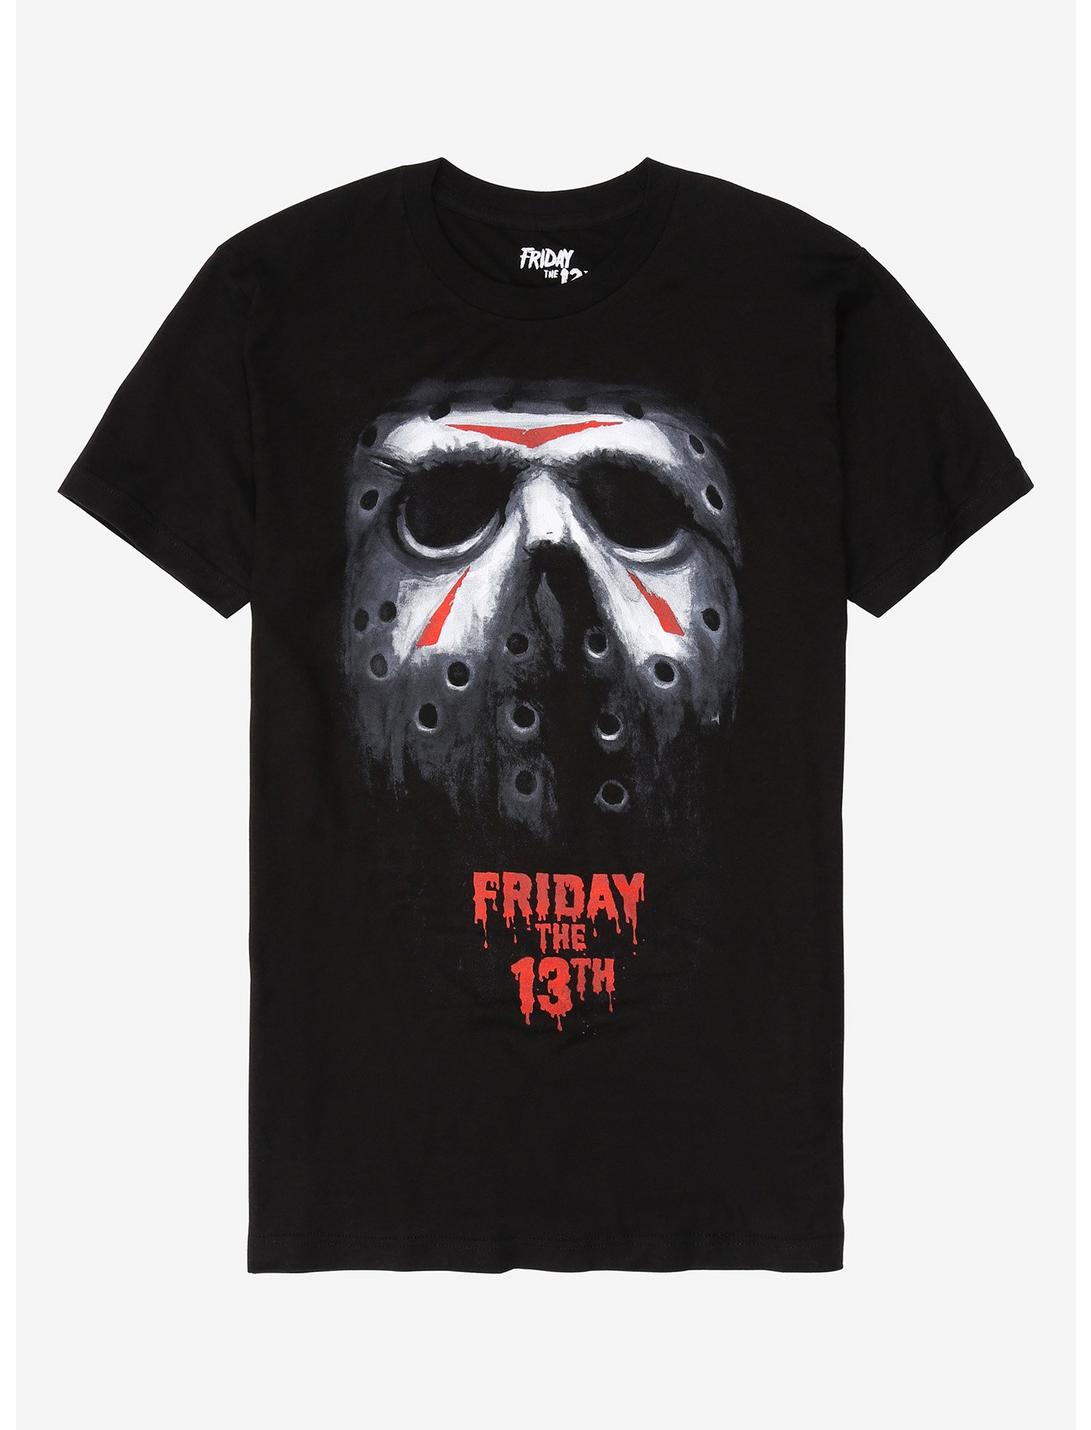 Friday The 13th Painted Mask T-Shirt, BLACK, hi-res